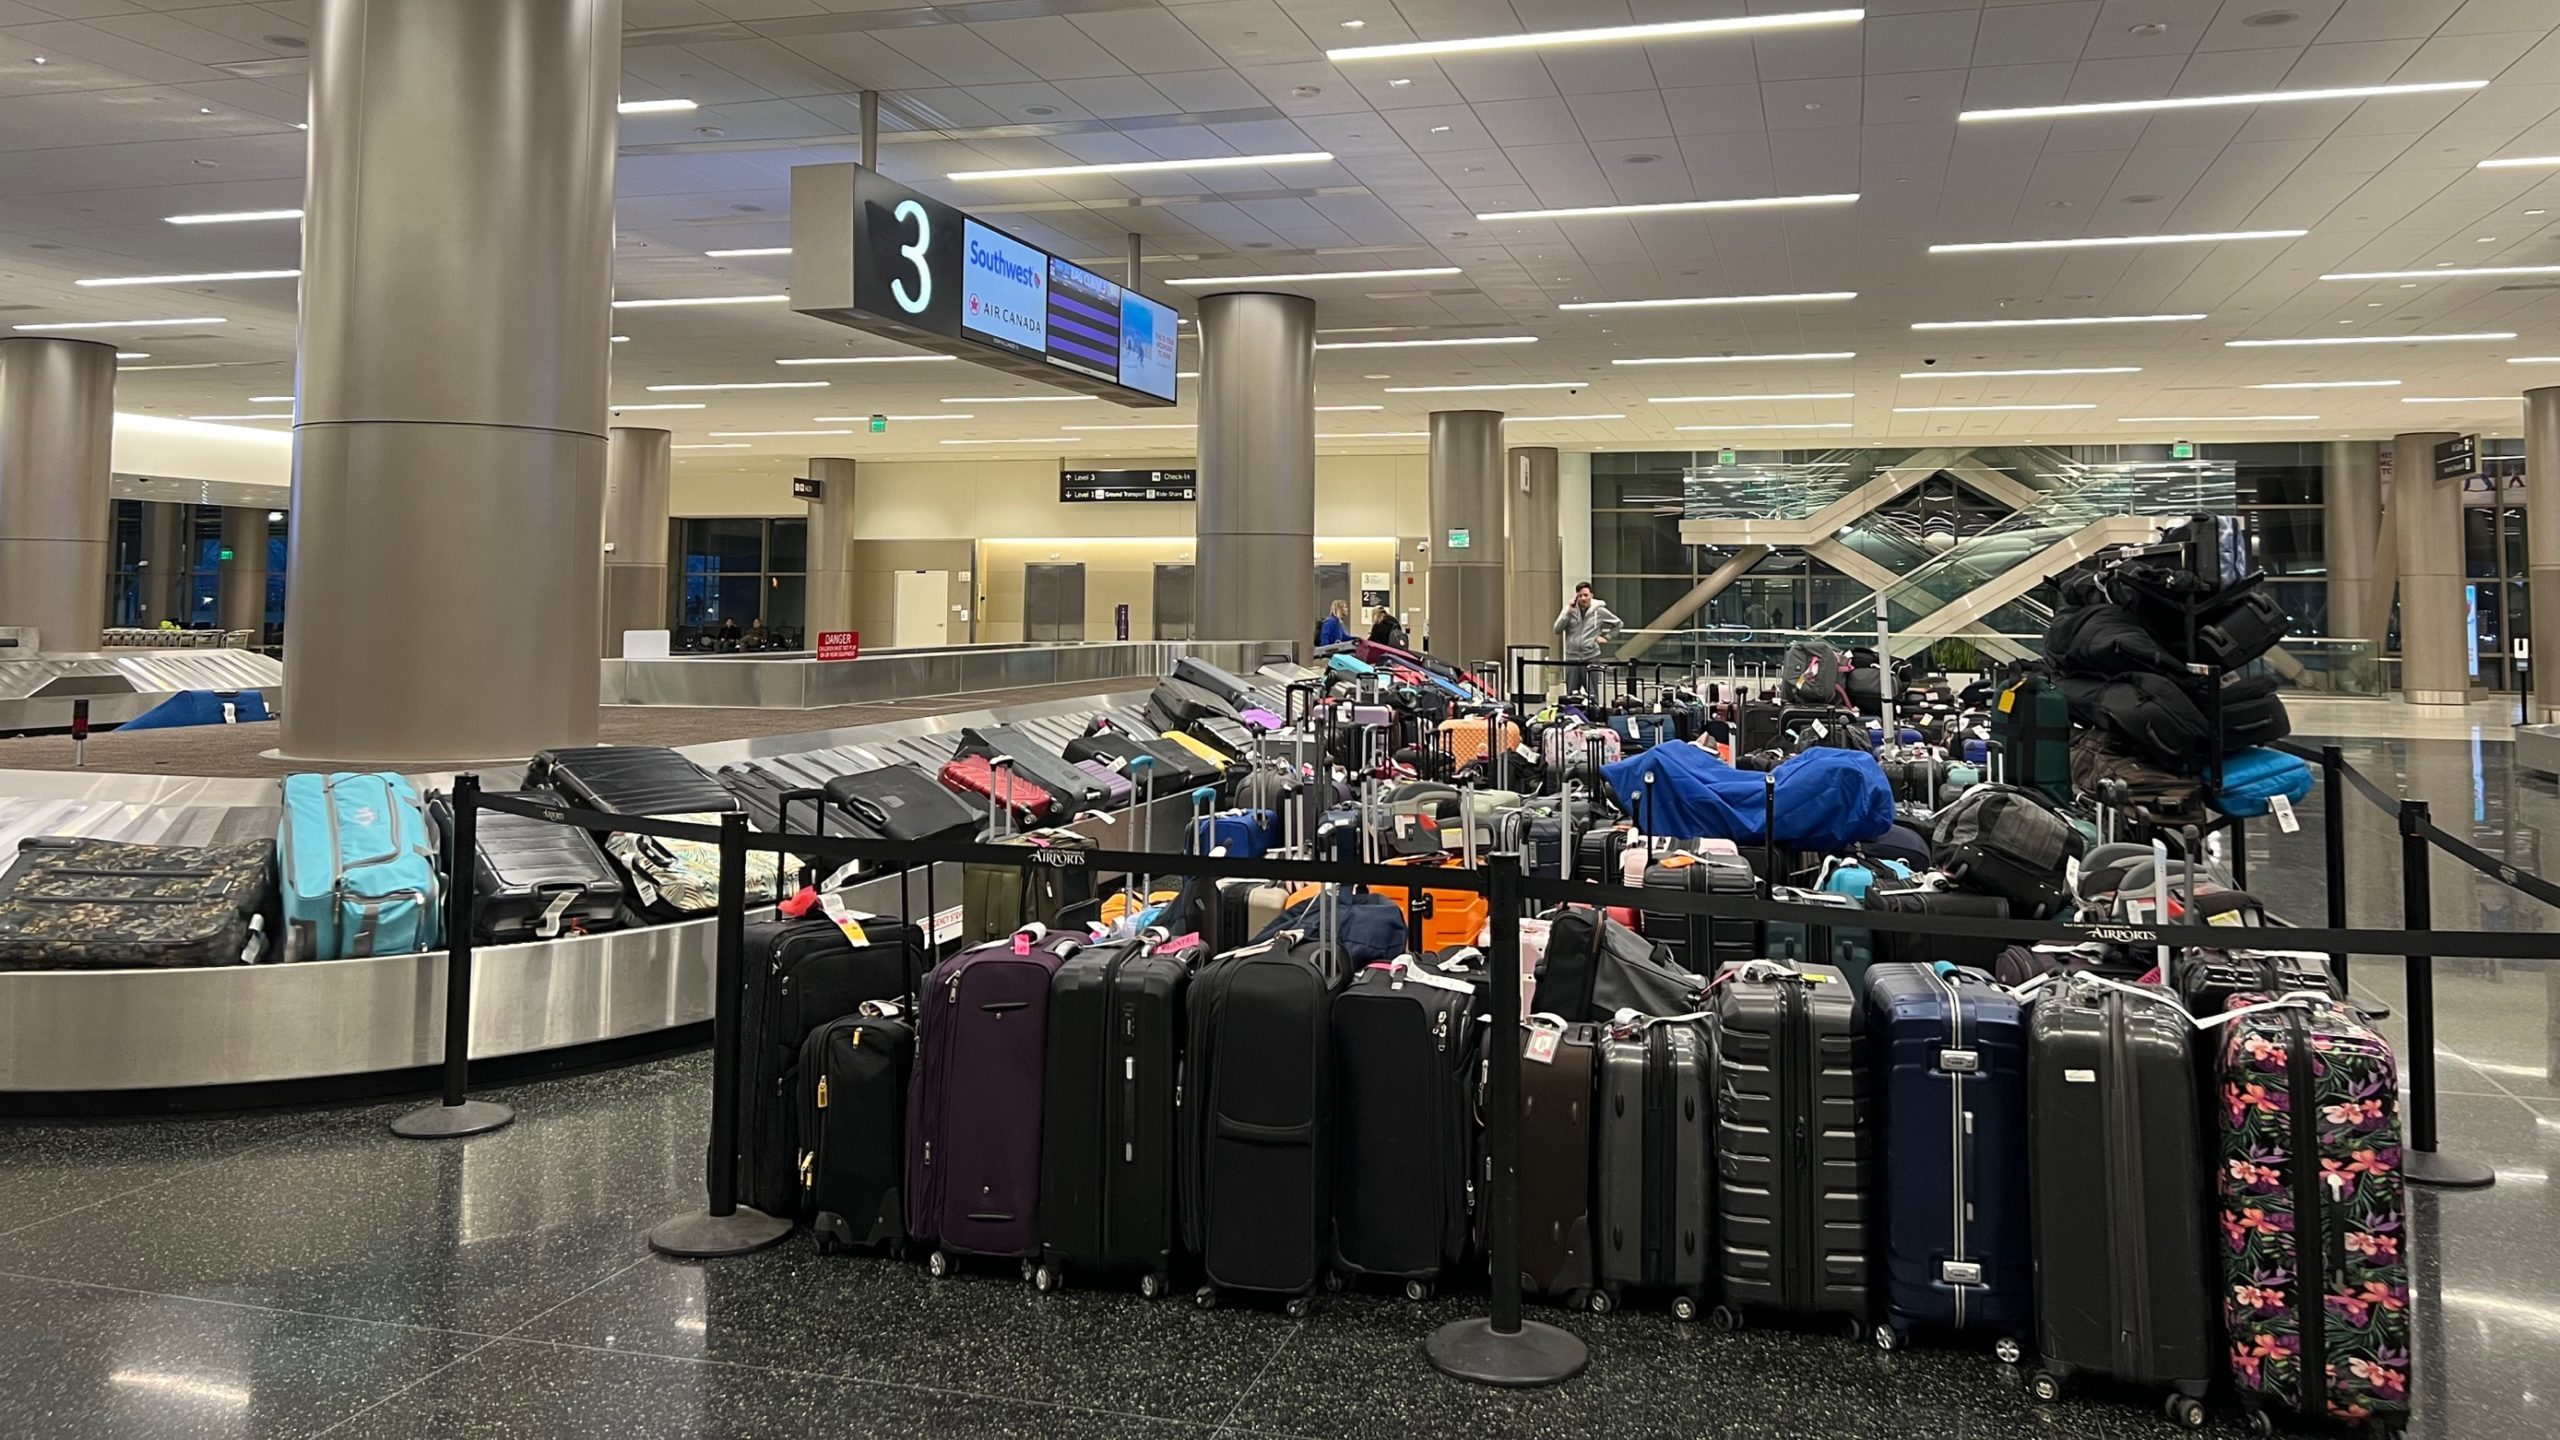 salt lake international airport baggage claim is full after cancellations...